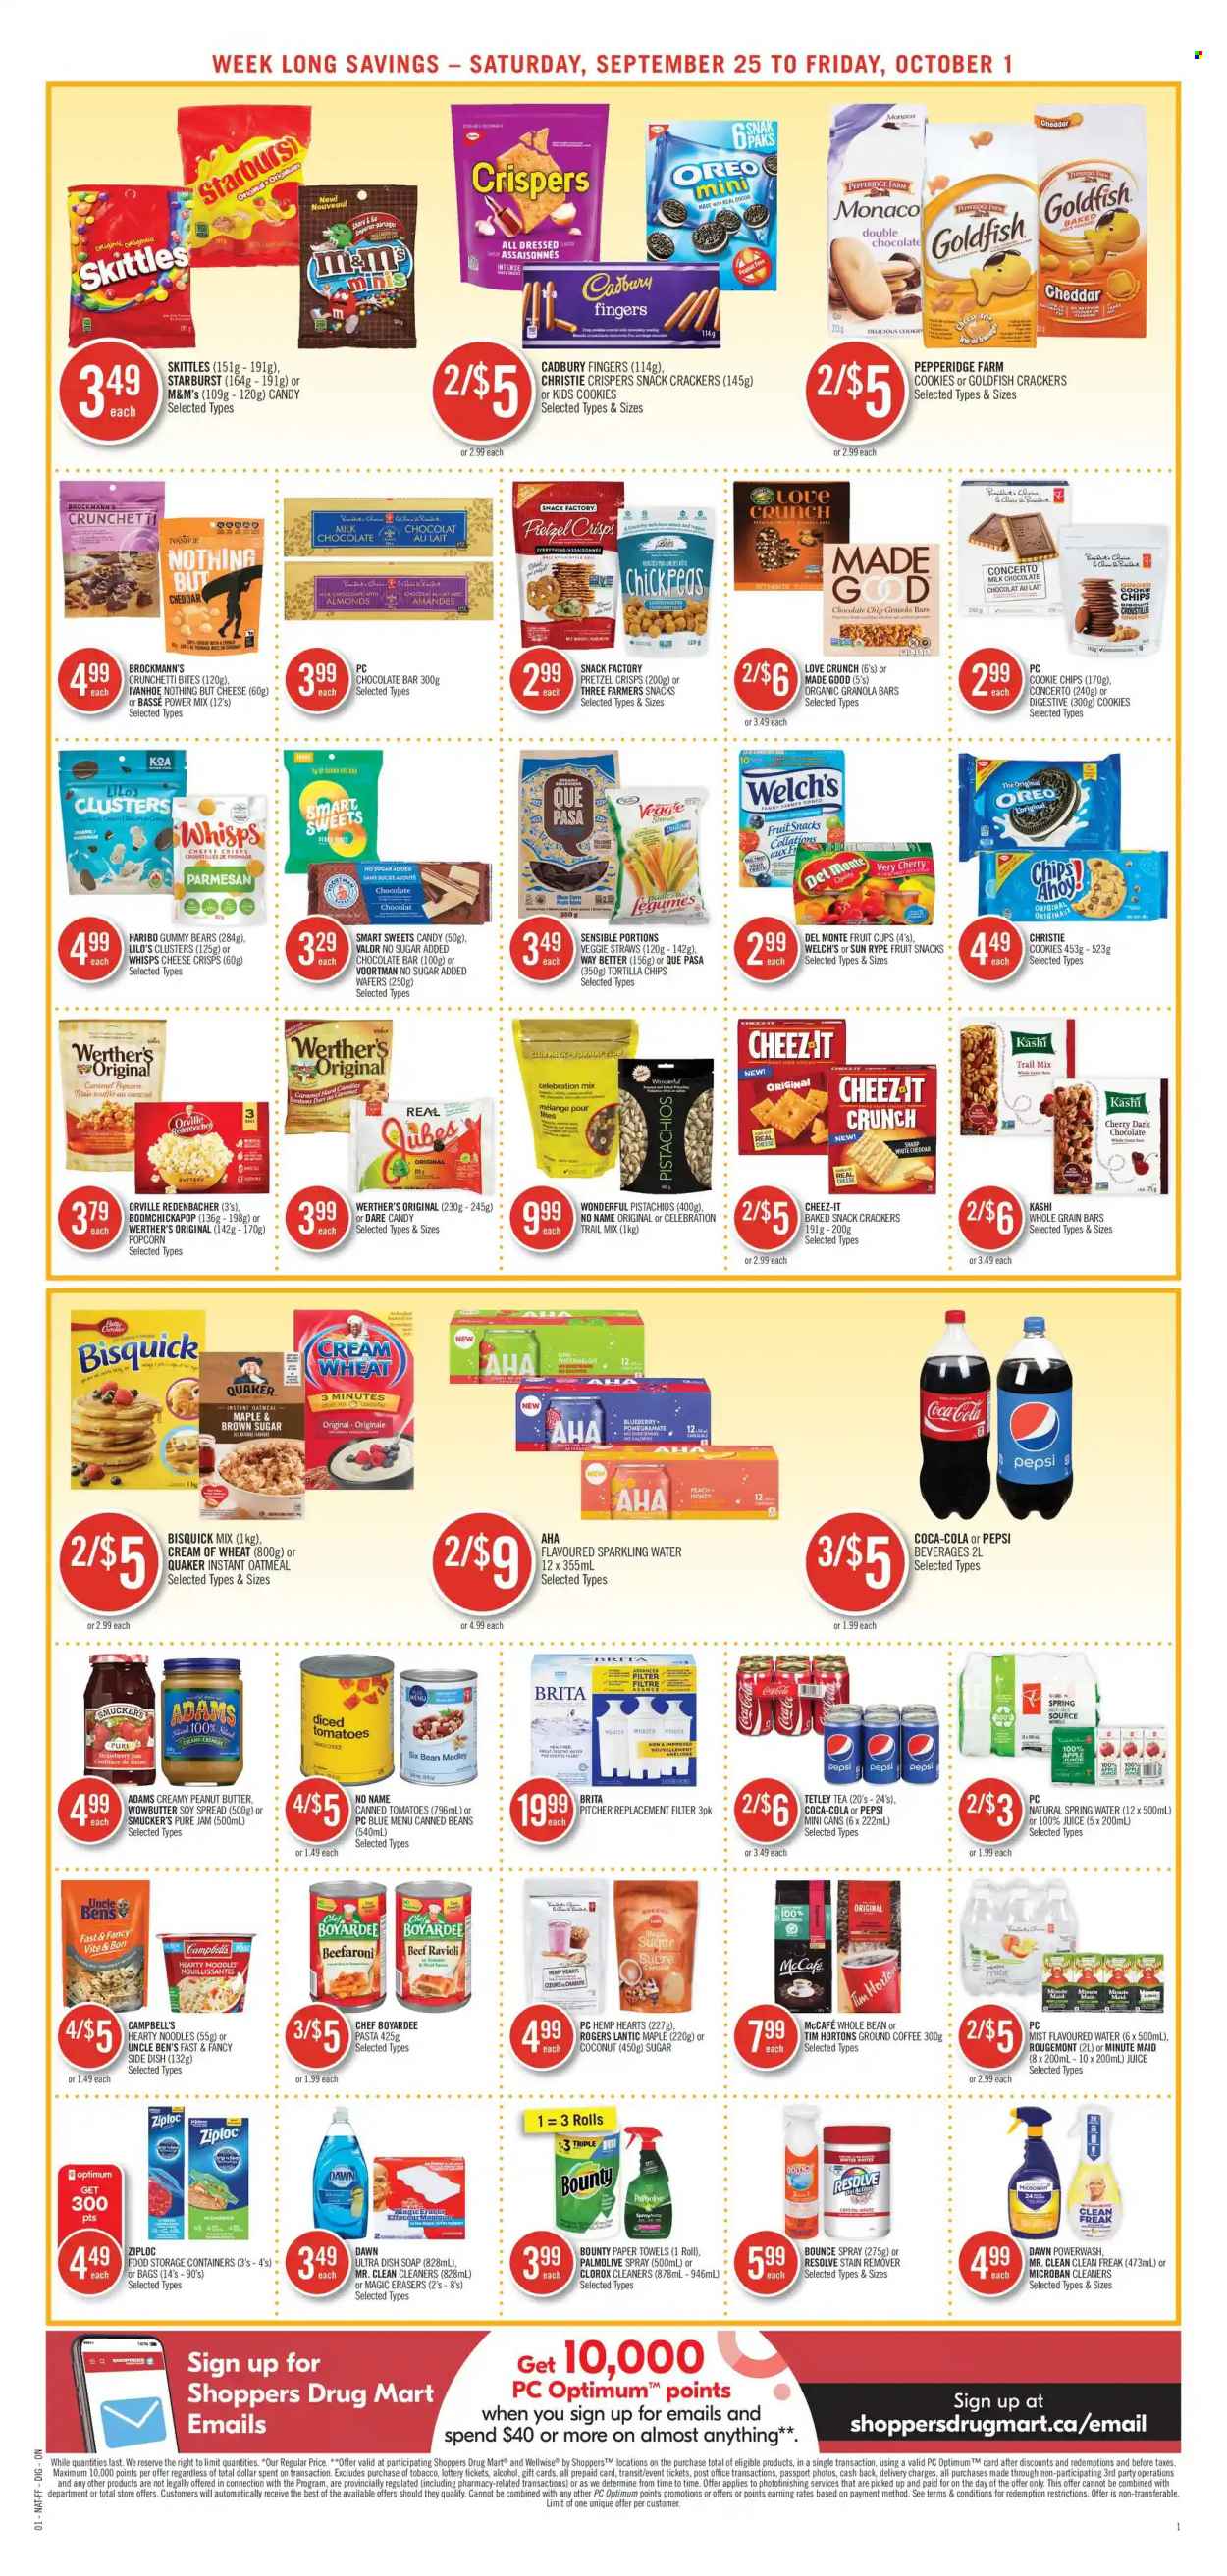 thumbnail - Shoppers Drug Mart Flyer - September 25, 2021 - October 01, 2021 - Sales products - cookies, milk chocolate, wafers, Haribo, Bounty, Celebration, crackers, dark chocolate, Cadbury, Digestive, Skittles, Welch's, fruit snack, Starburst, chocolate bar, tortilla chips, popcorn, Goldfish, veggie straws, Cheez-It, pretzel crisps, Bisquick, oatmeal, corn, Uncle Ben's, Chef Boyardee, Cream of Wheat, granola bar, Quaker, ravioli, chickpeas, pasta, noodles, ginger, Campbell's, caramel, honey, fruit jam, peanut butter, almonds, pistachios, trail mix, Coca-Cola, Pepsi, juice, fruit punch, tea, coffee, ground coffee, McCafe, kitchen towels, paper towels, stain remover, Clorox, Bounce, Palmolive, soap, Ziploc, alcohol, Oreo, chips, M&M's. Page 8.